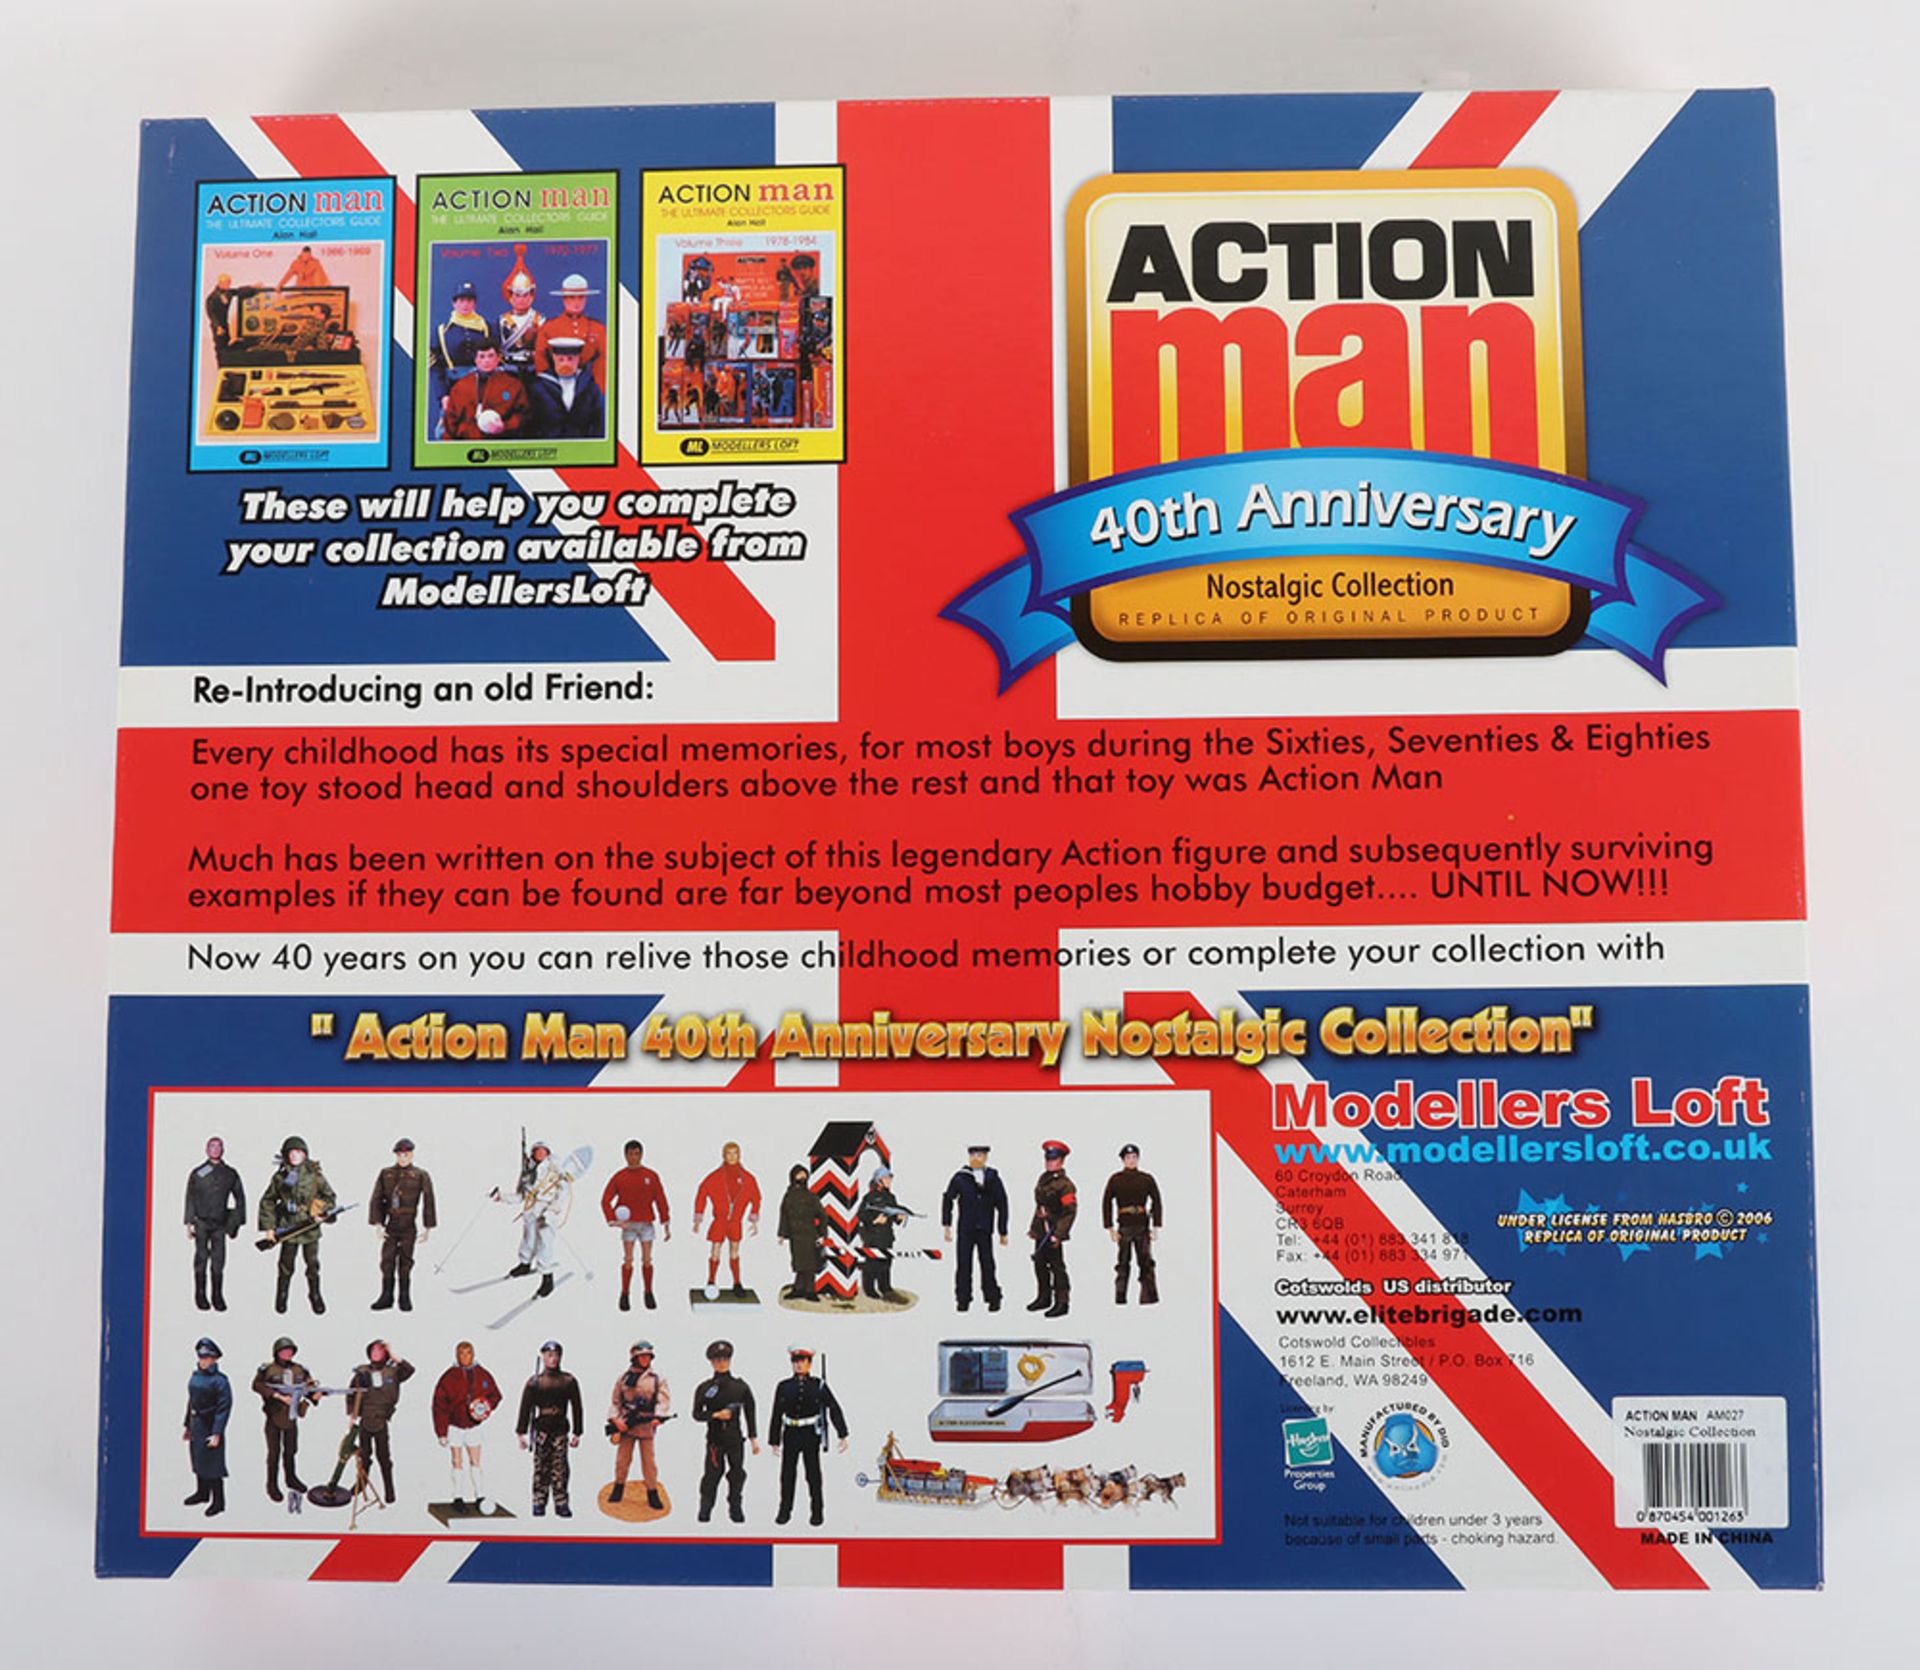 Action Man Palitoy Sportsman Famous Football Clubs Liverpool 40th Anniversary Nostalgic Collection - Image 2 of 4